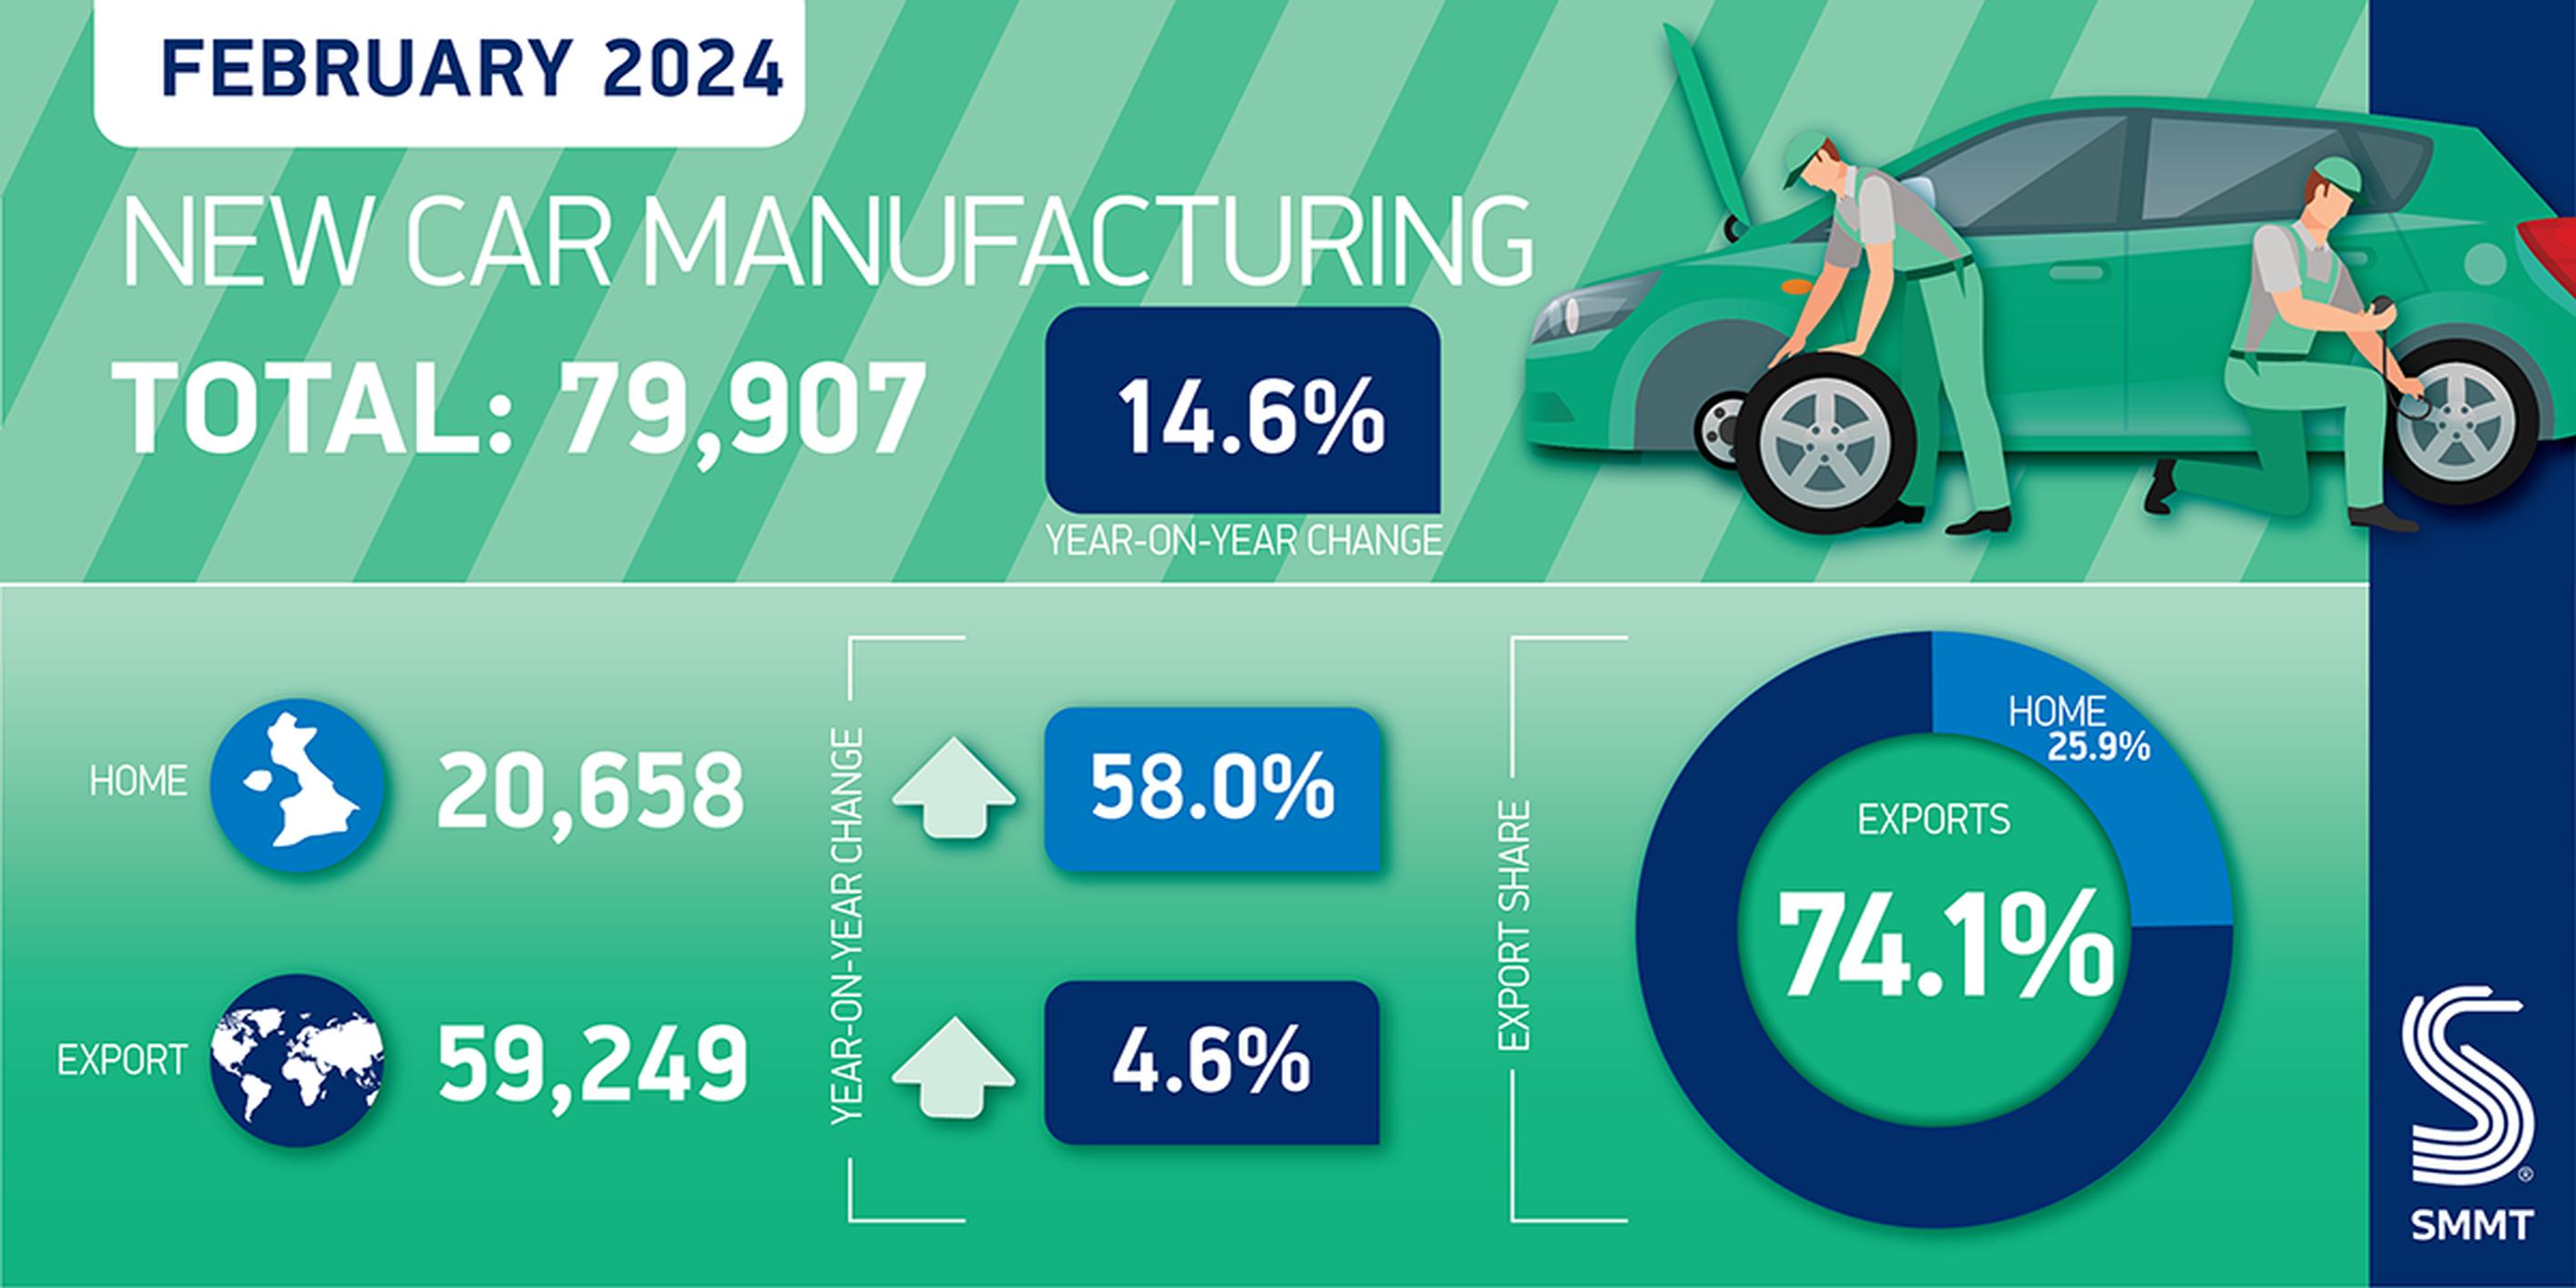 Six consecutive months of growth for UK car production